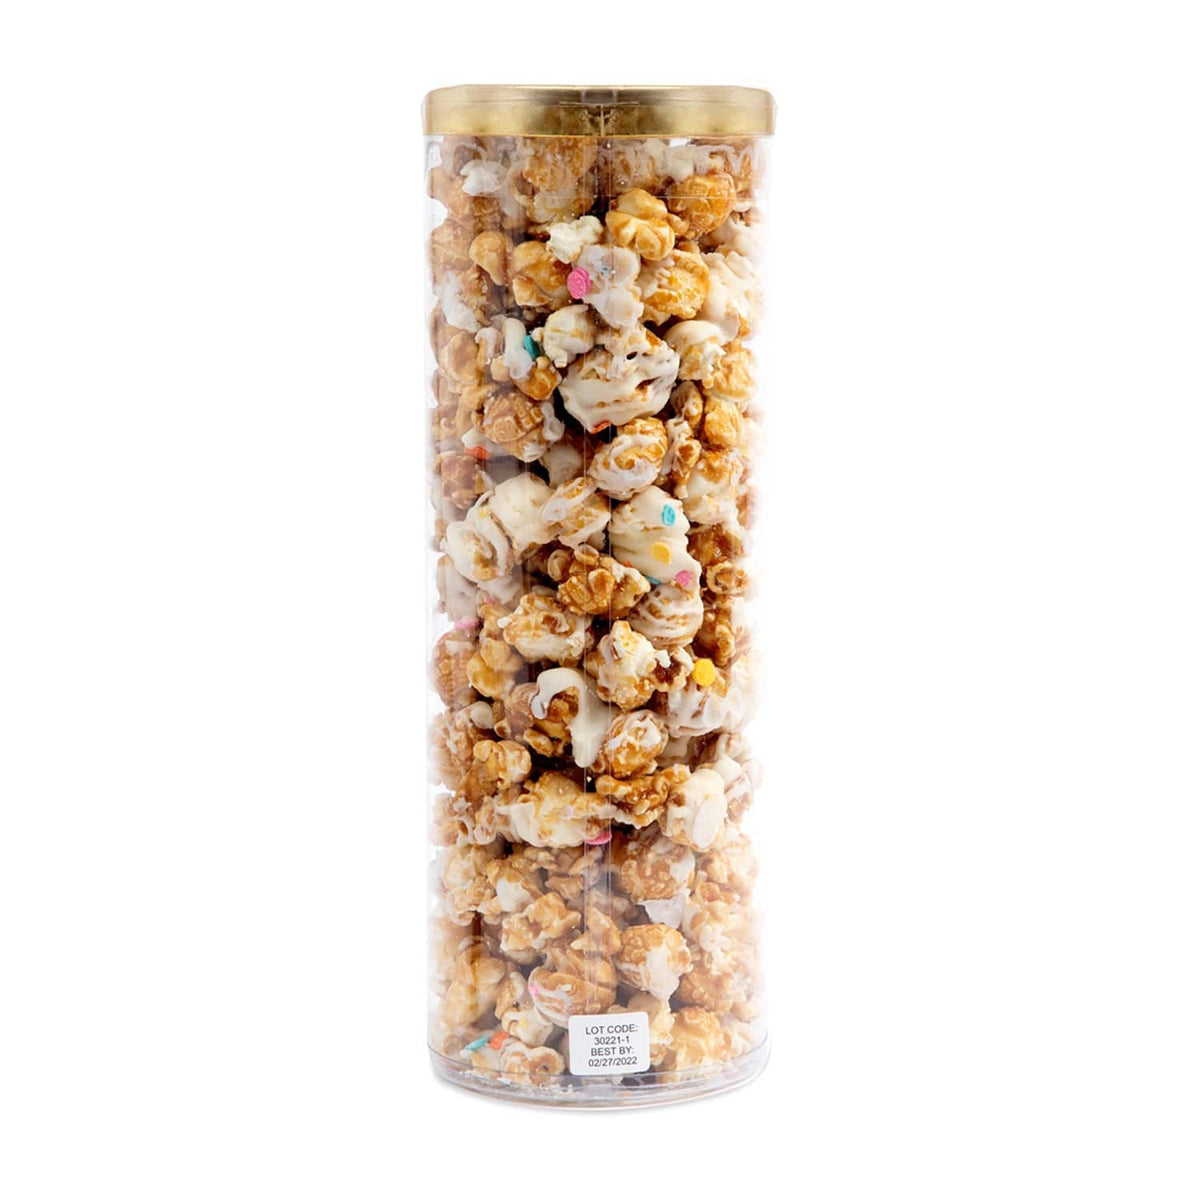 Lolli and Pops L&amp;P Collection Birthday Cake Caramel Corn